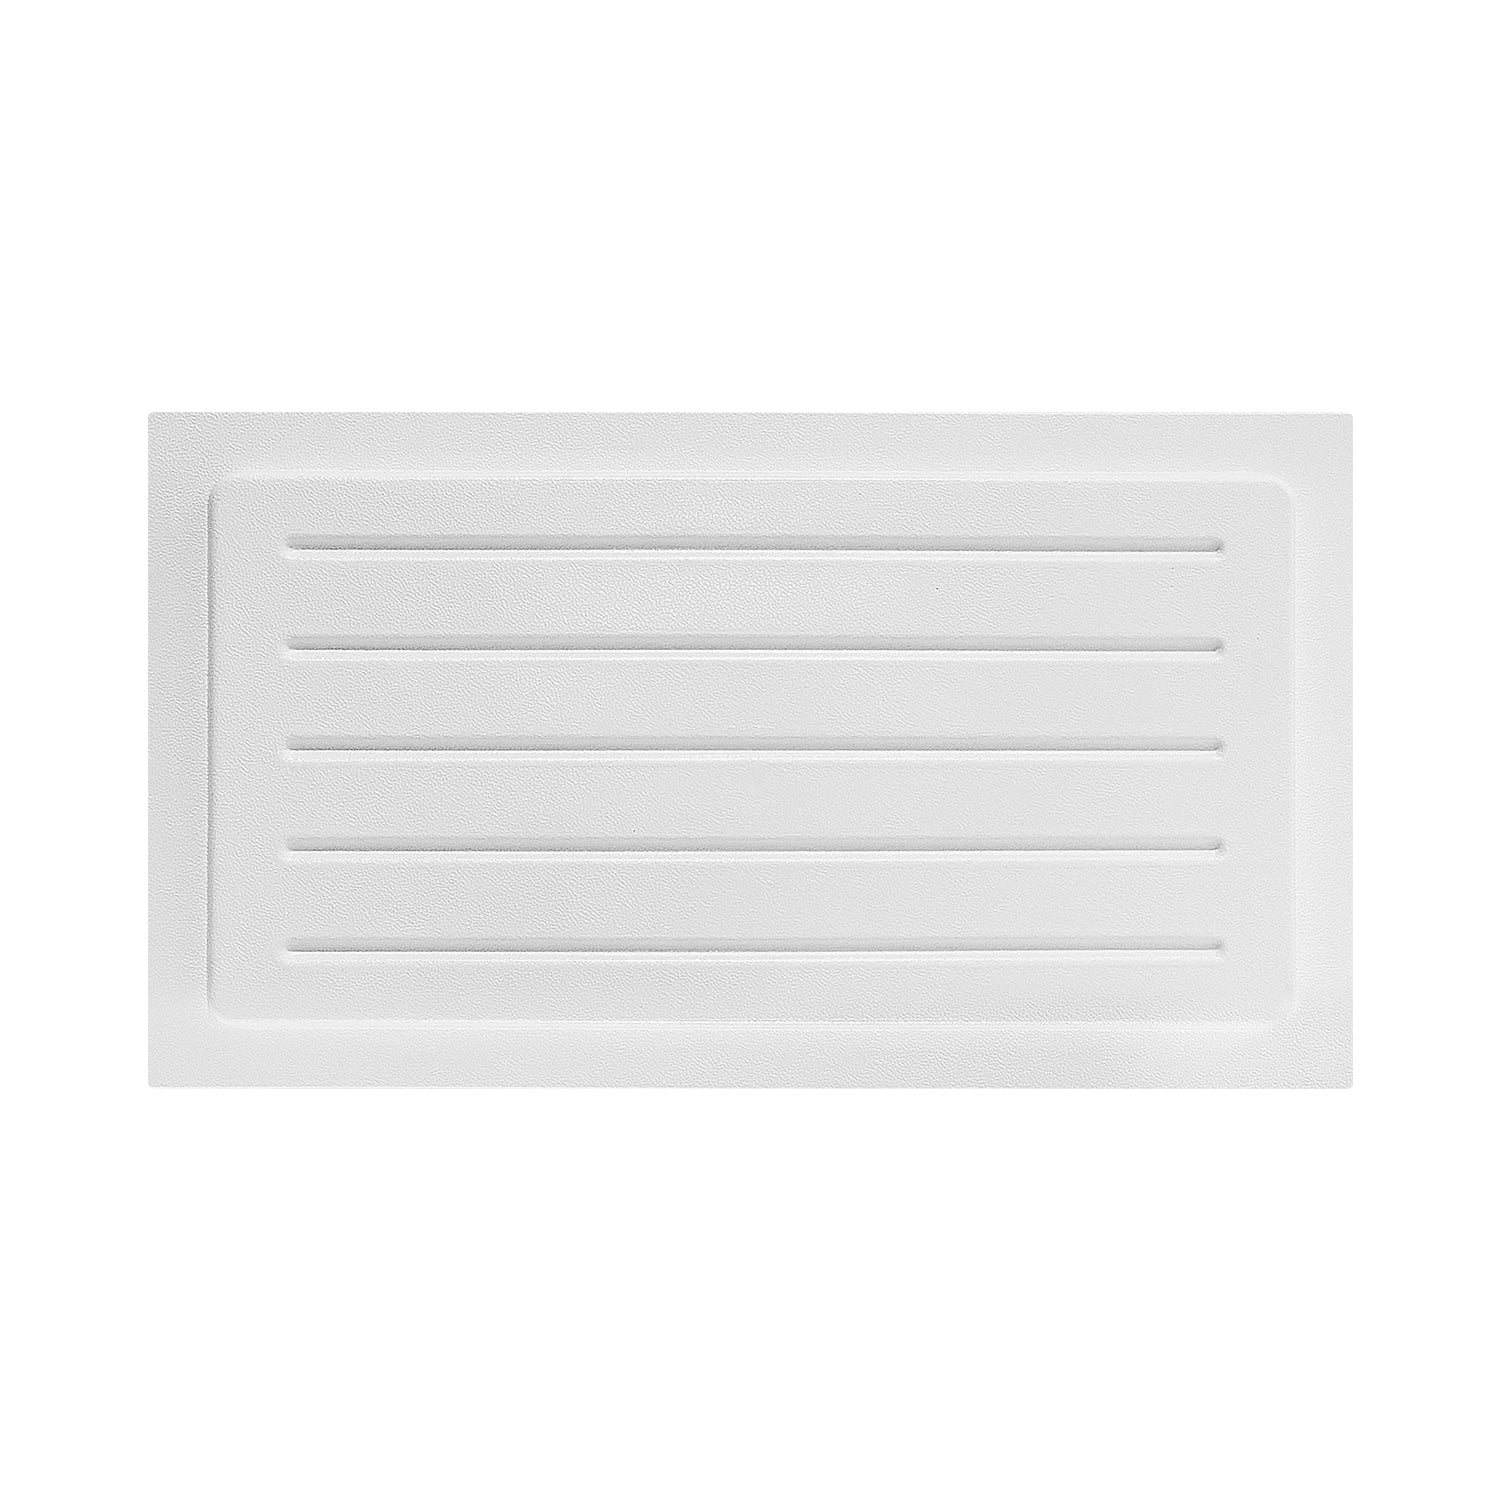 Large outward mounted vent cover (white)